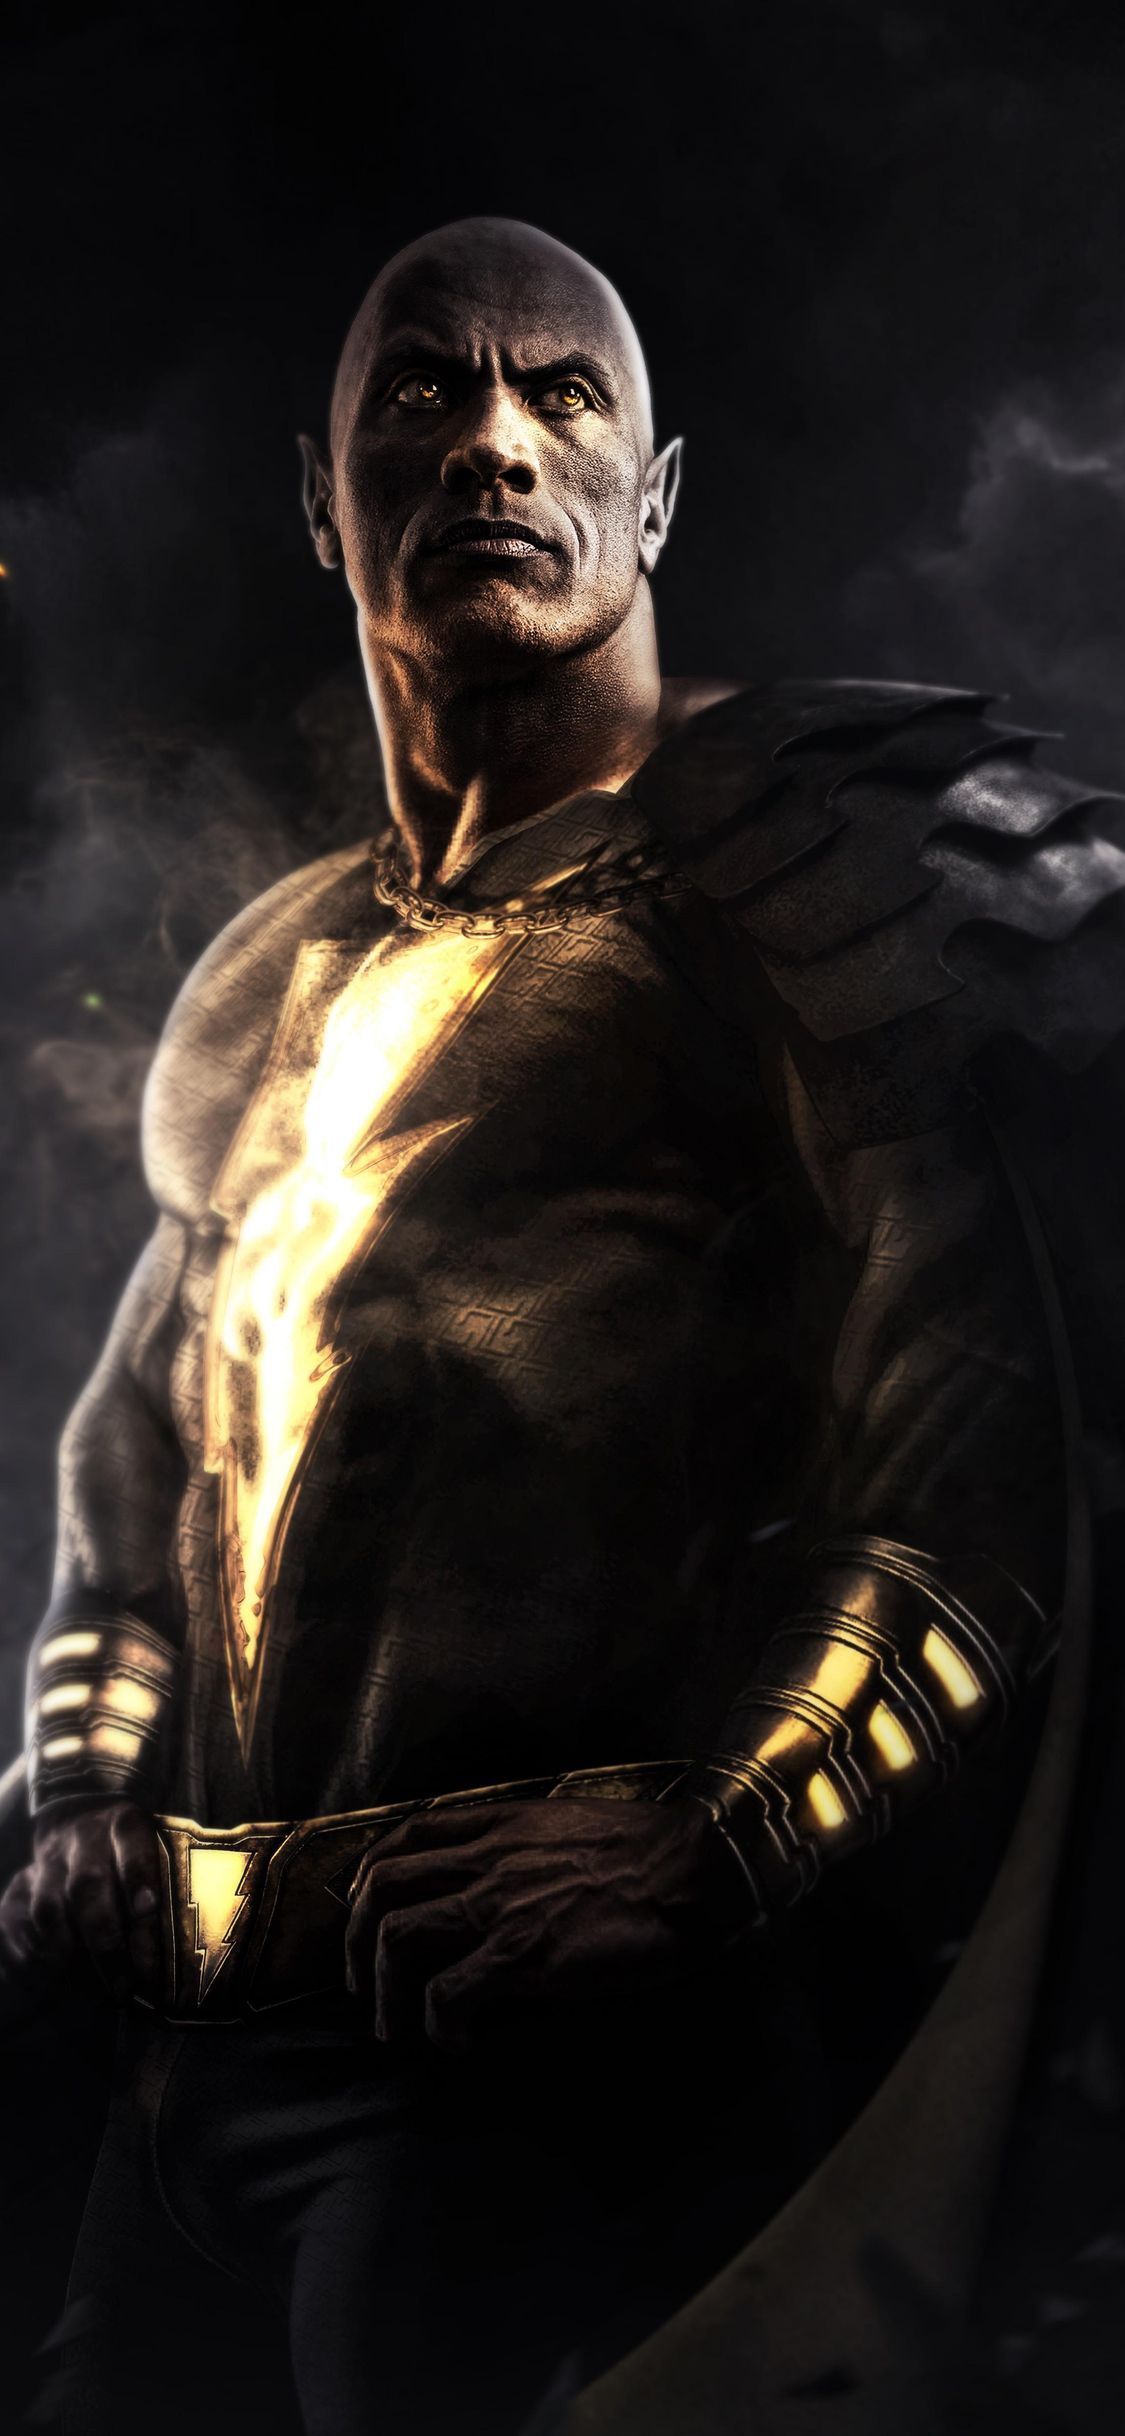 Black Adam Movie iPhone XS, iPhone iPhone X HD 4k Wallpaper, Image, Background, Photo and Pictur. The rock dwayne johnson, Dwayne the rock, Shazam